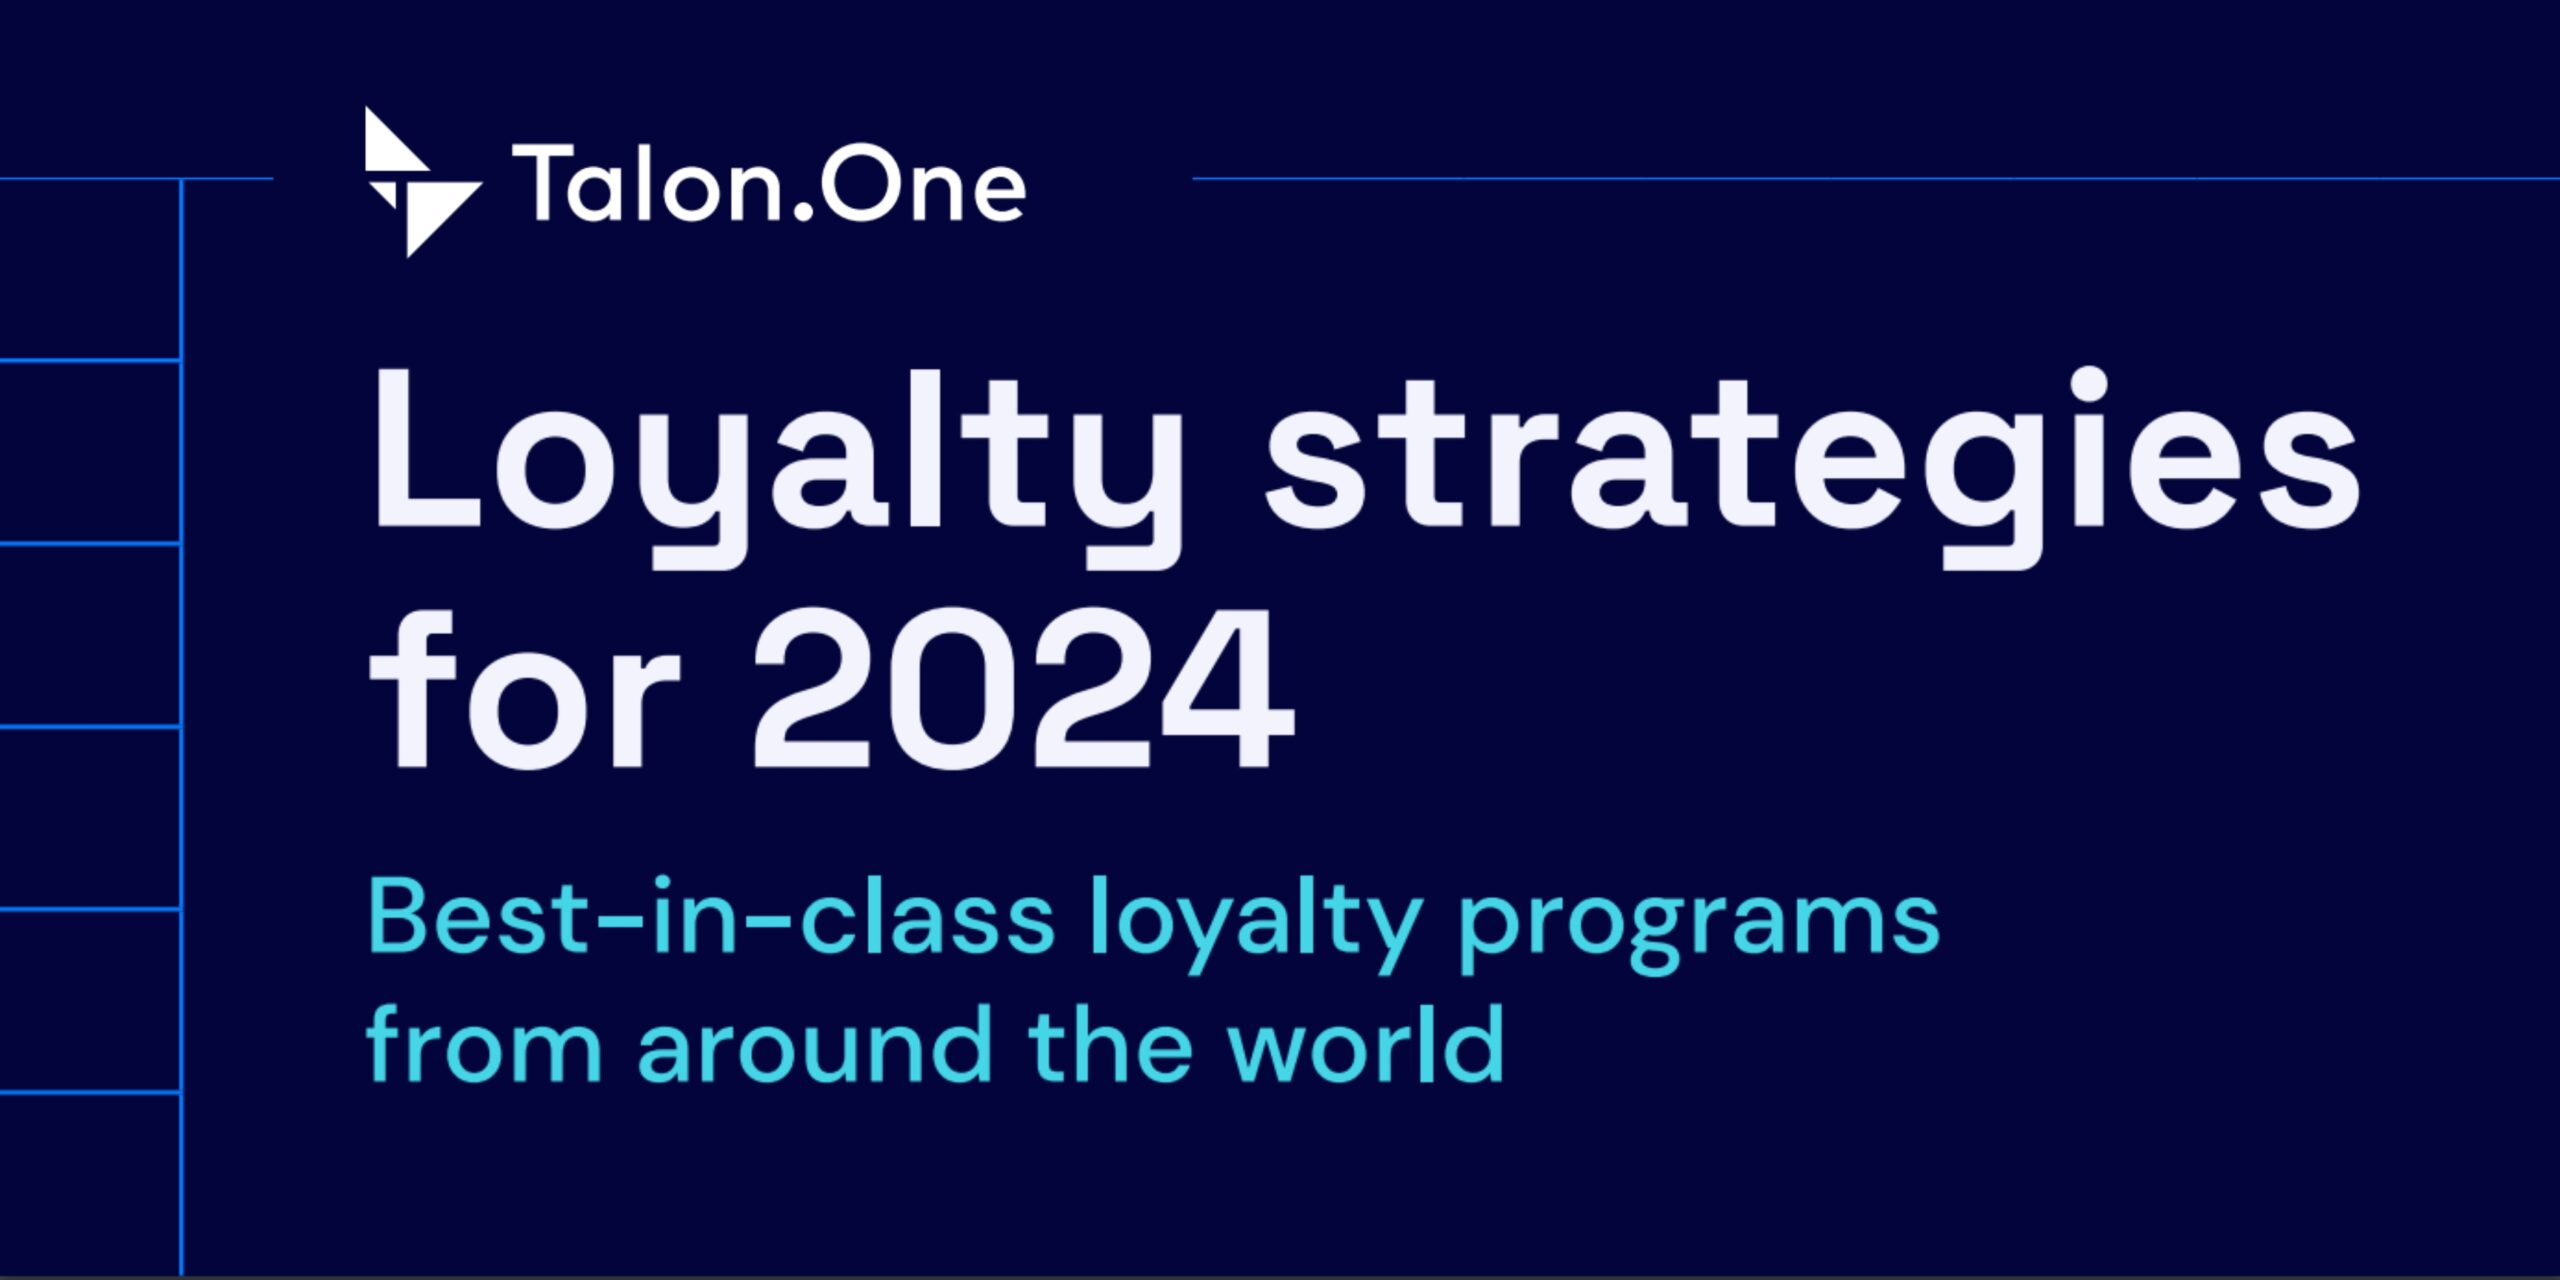 Loyalty strategies for 2024 by Talon.One 1 scaled